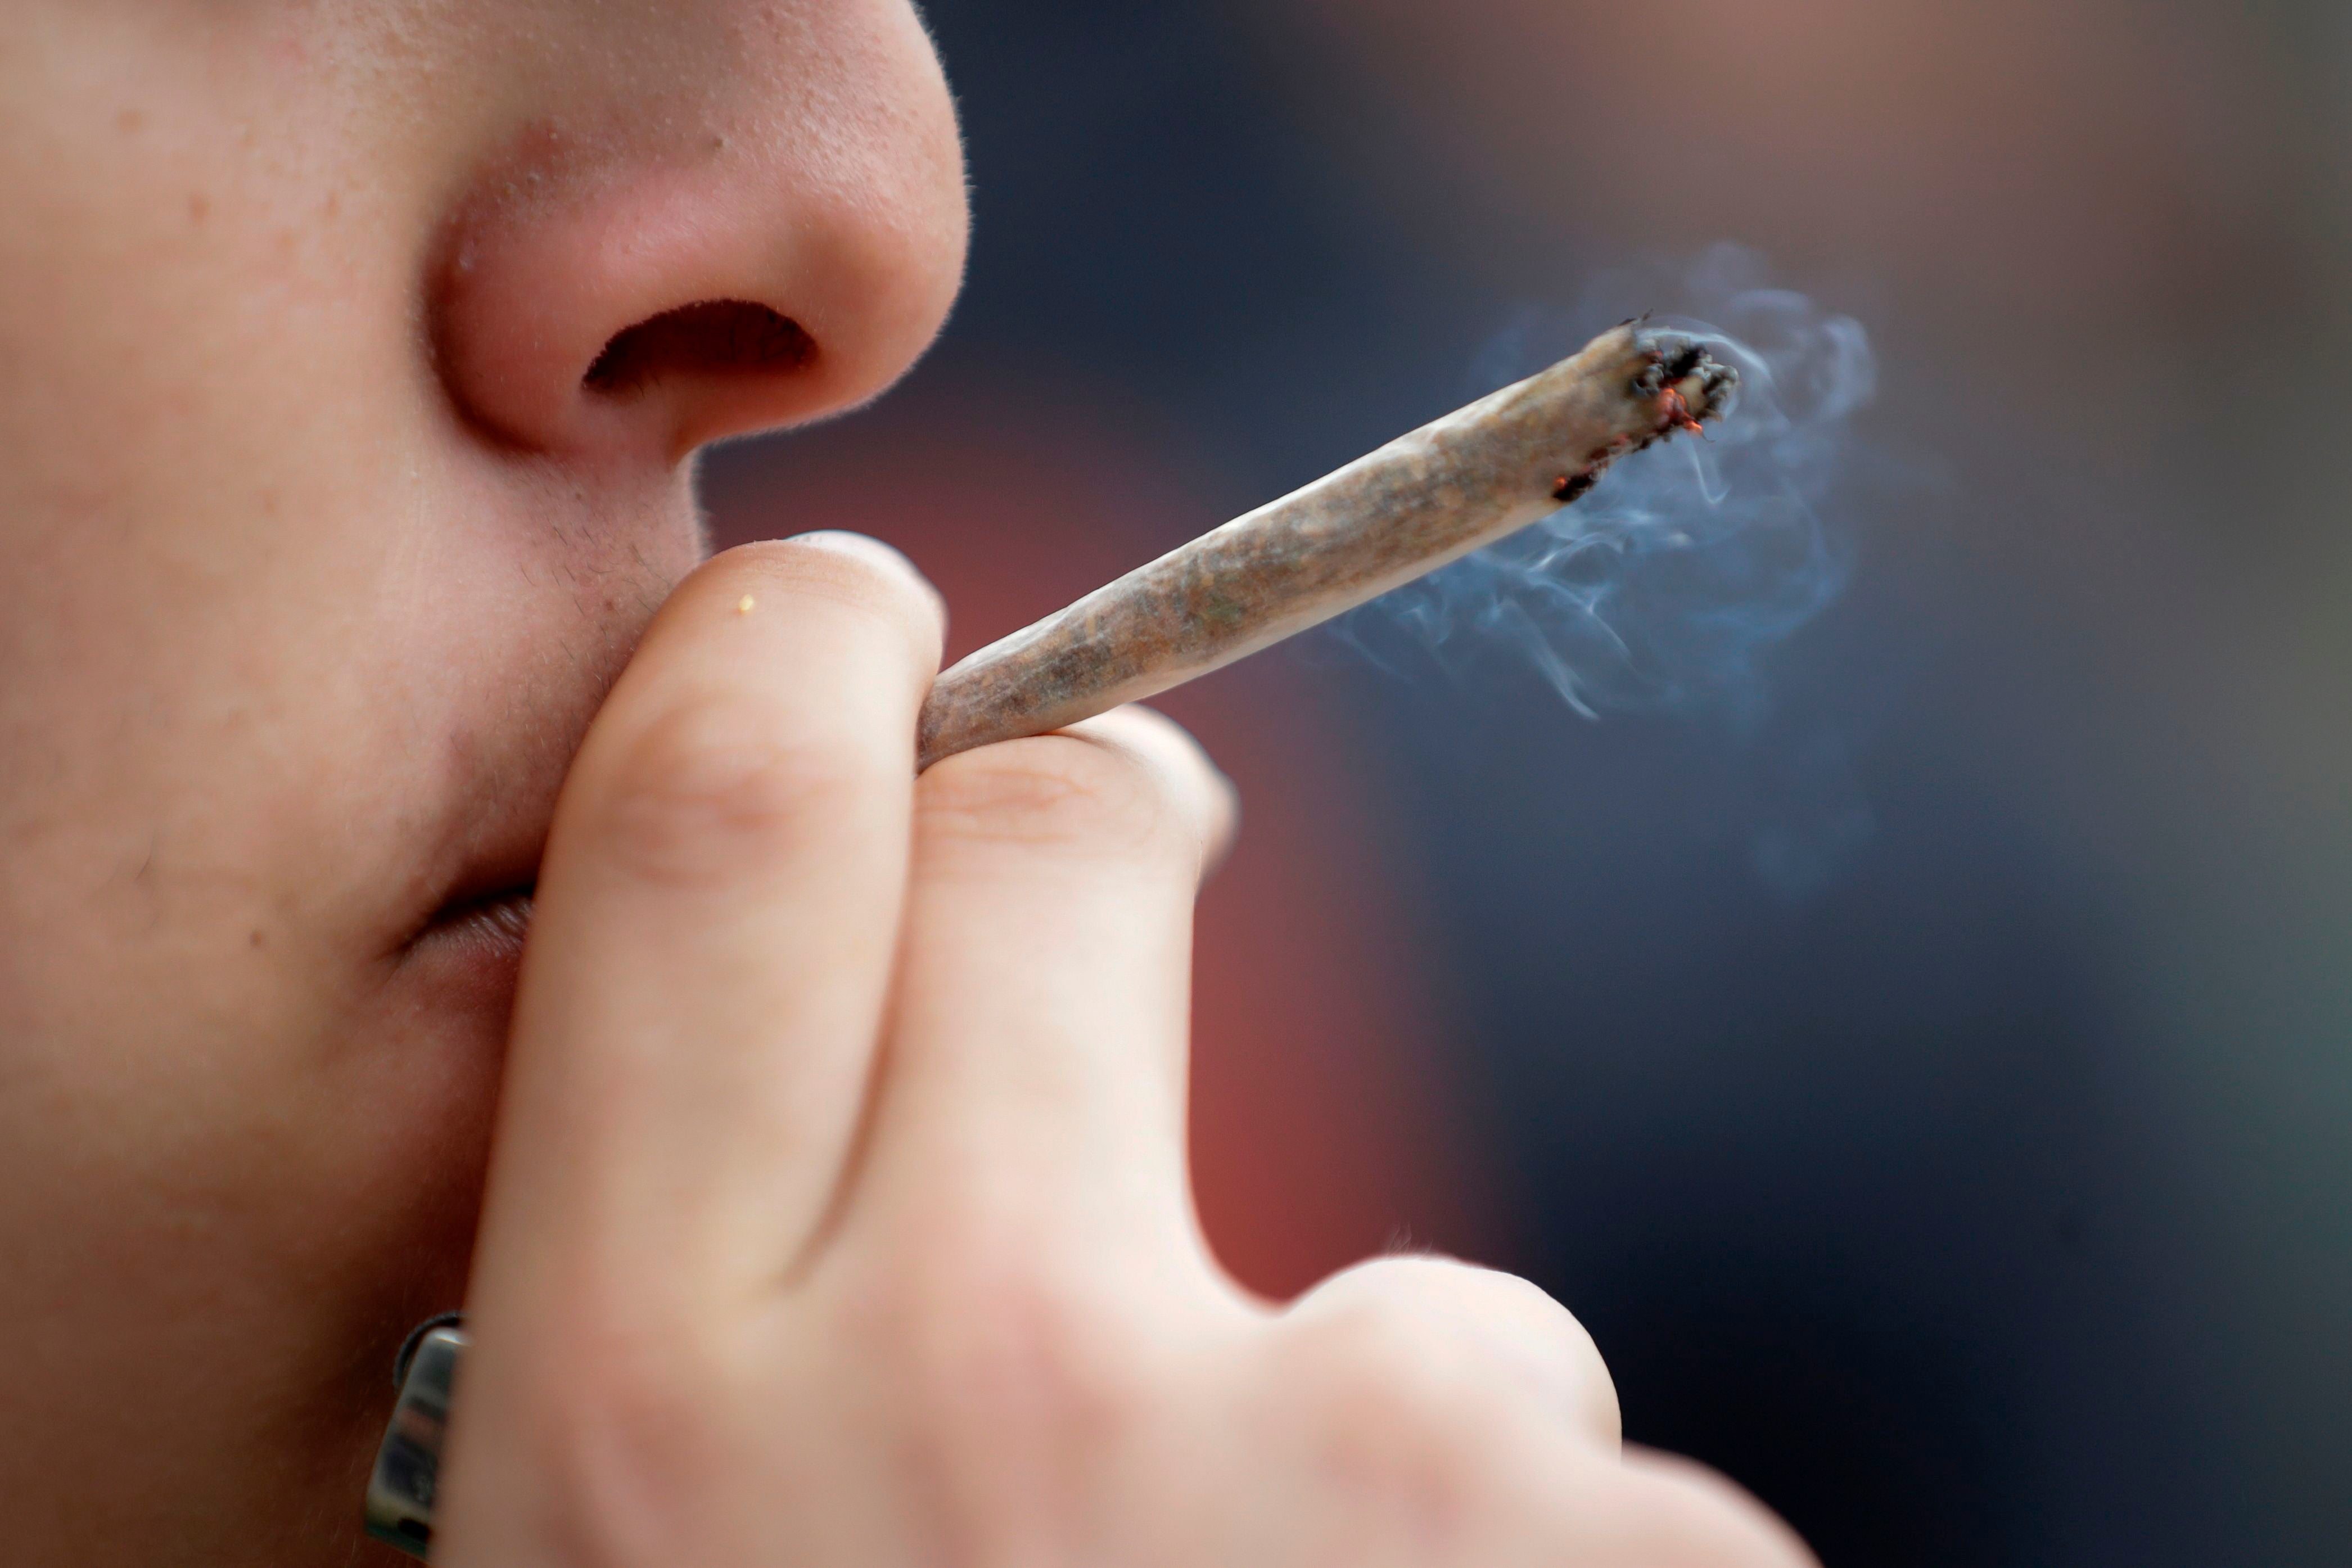 A police and crime commissioner wants prisoners to be given cannabis behind bars